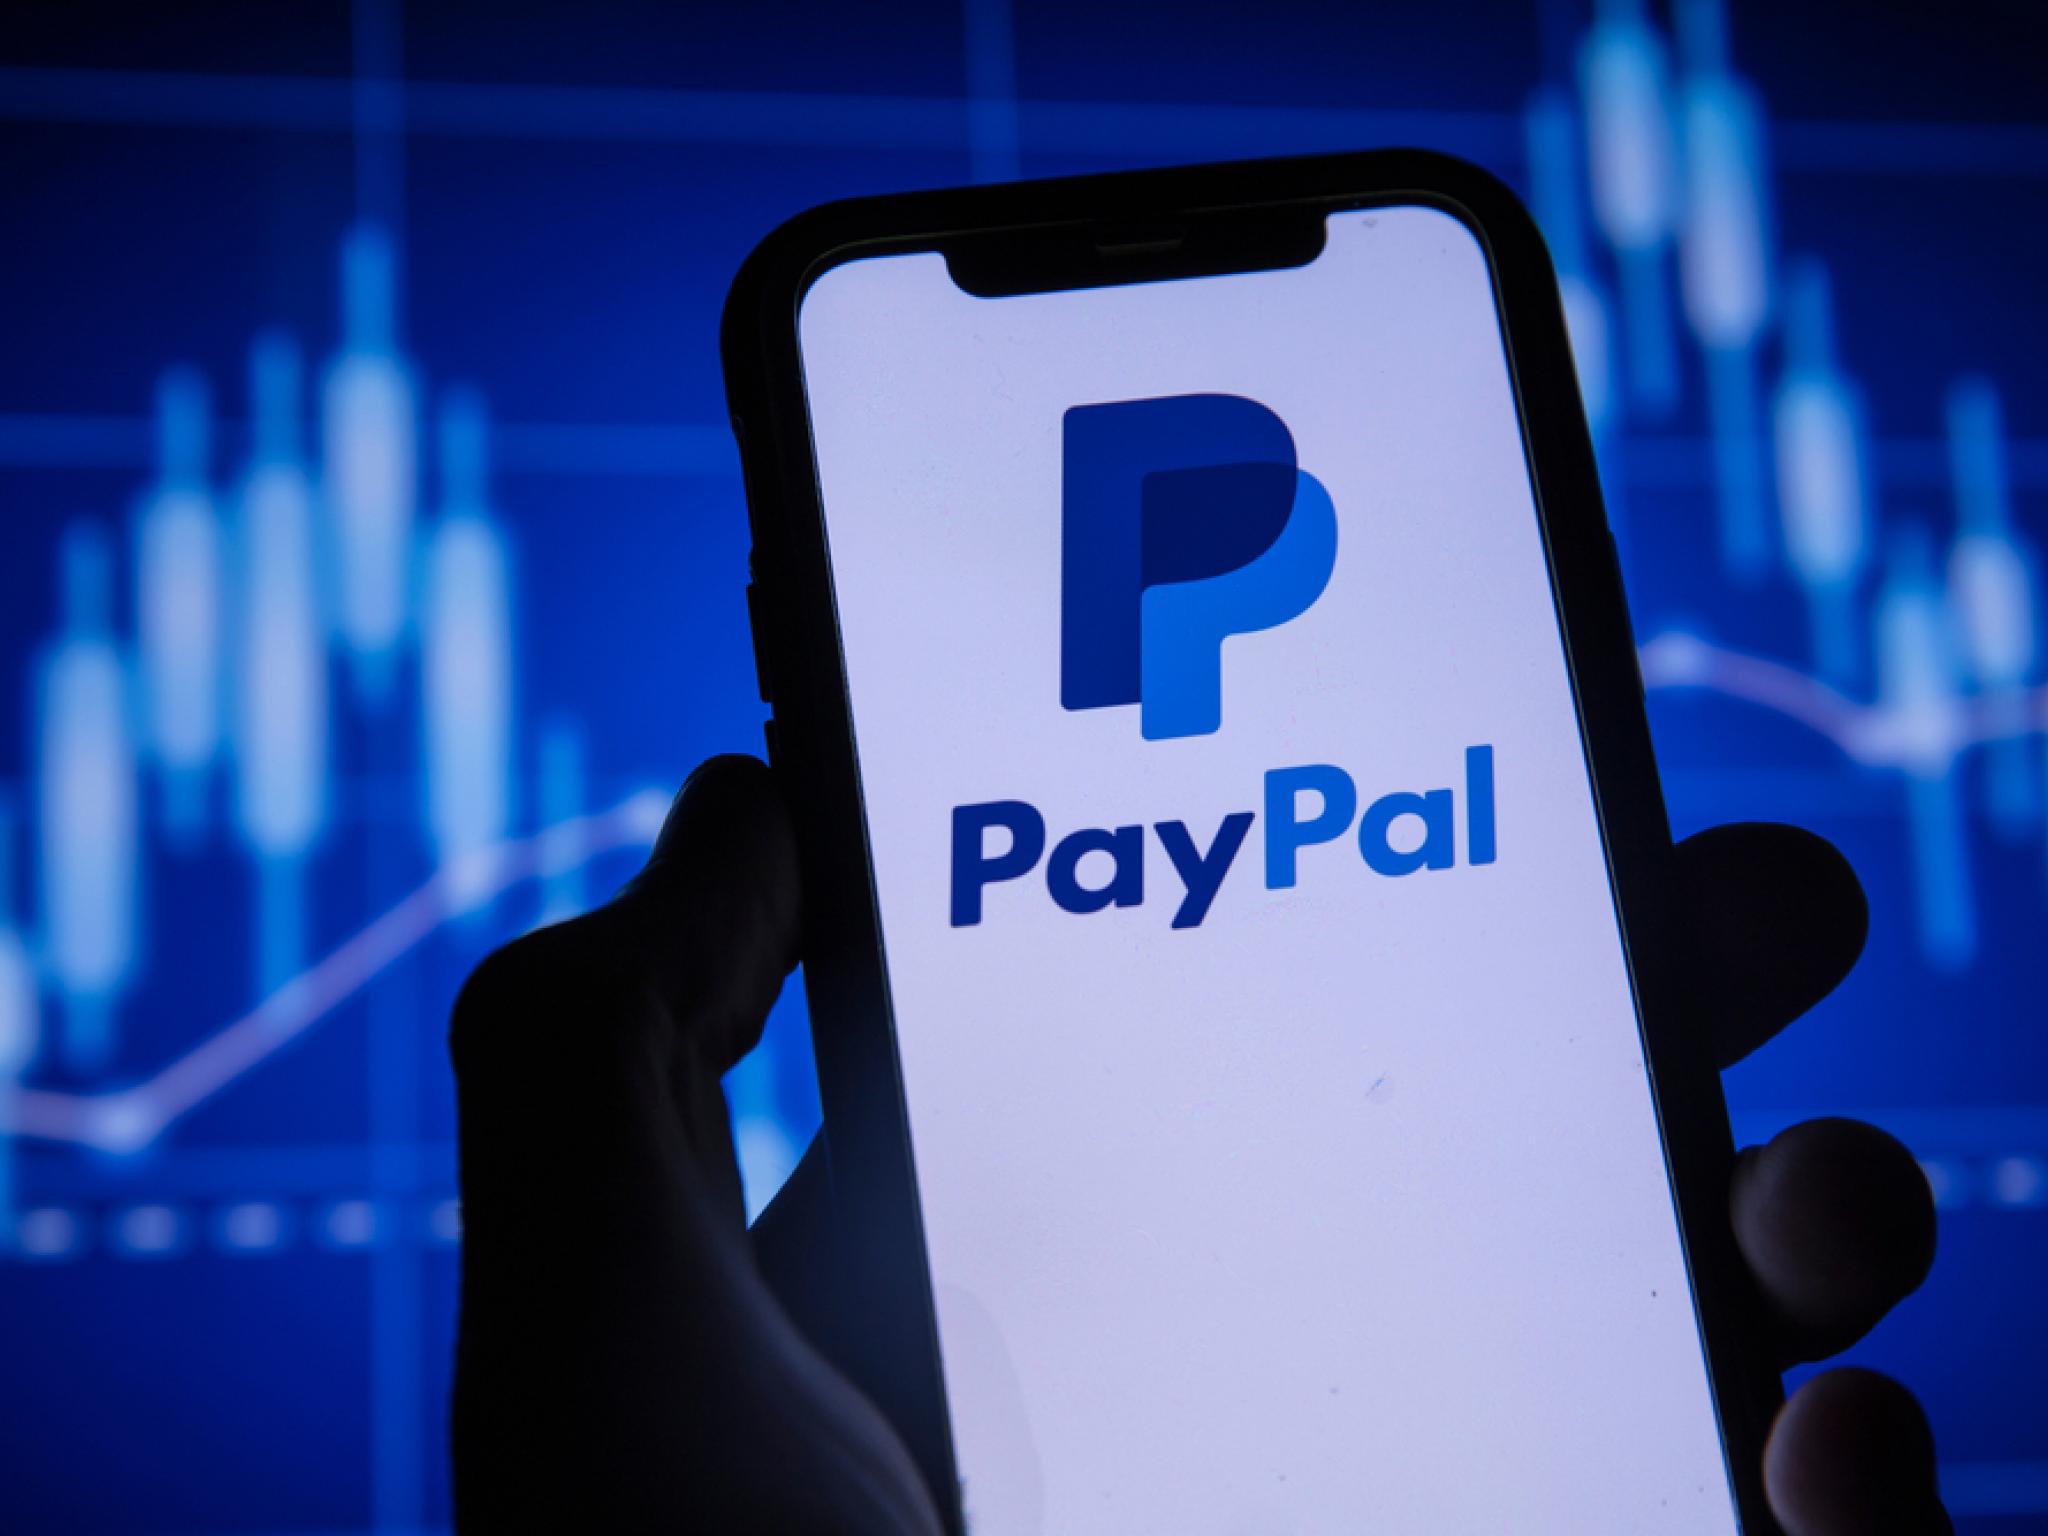  5-paypal-analysts-praise-solid-q1-earnings-nice-to-see-dollar-growth-turn-positive-updated 